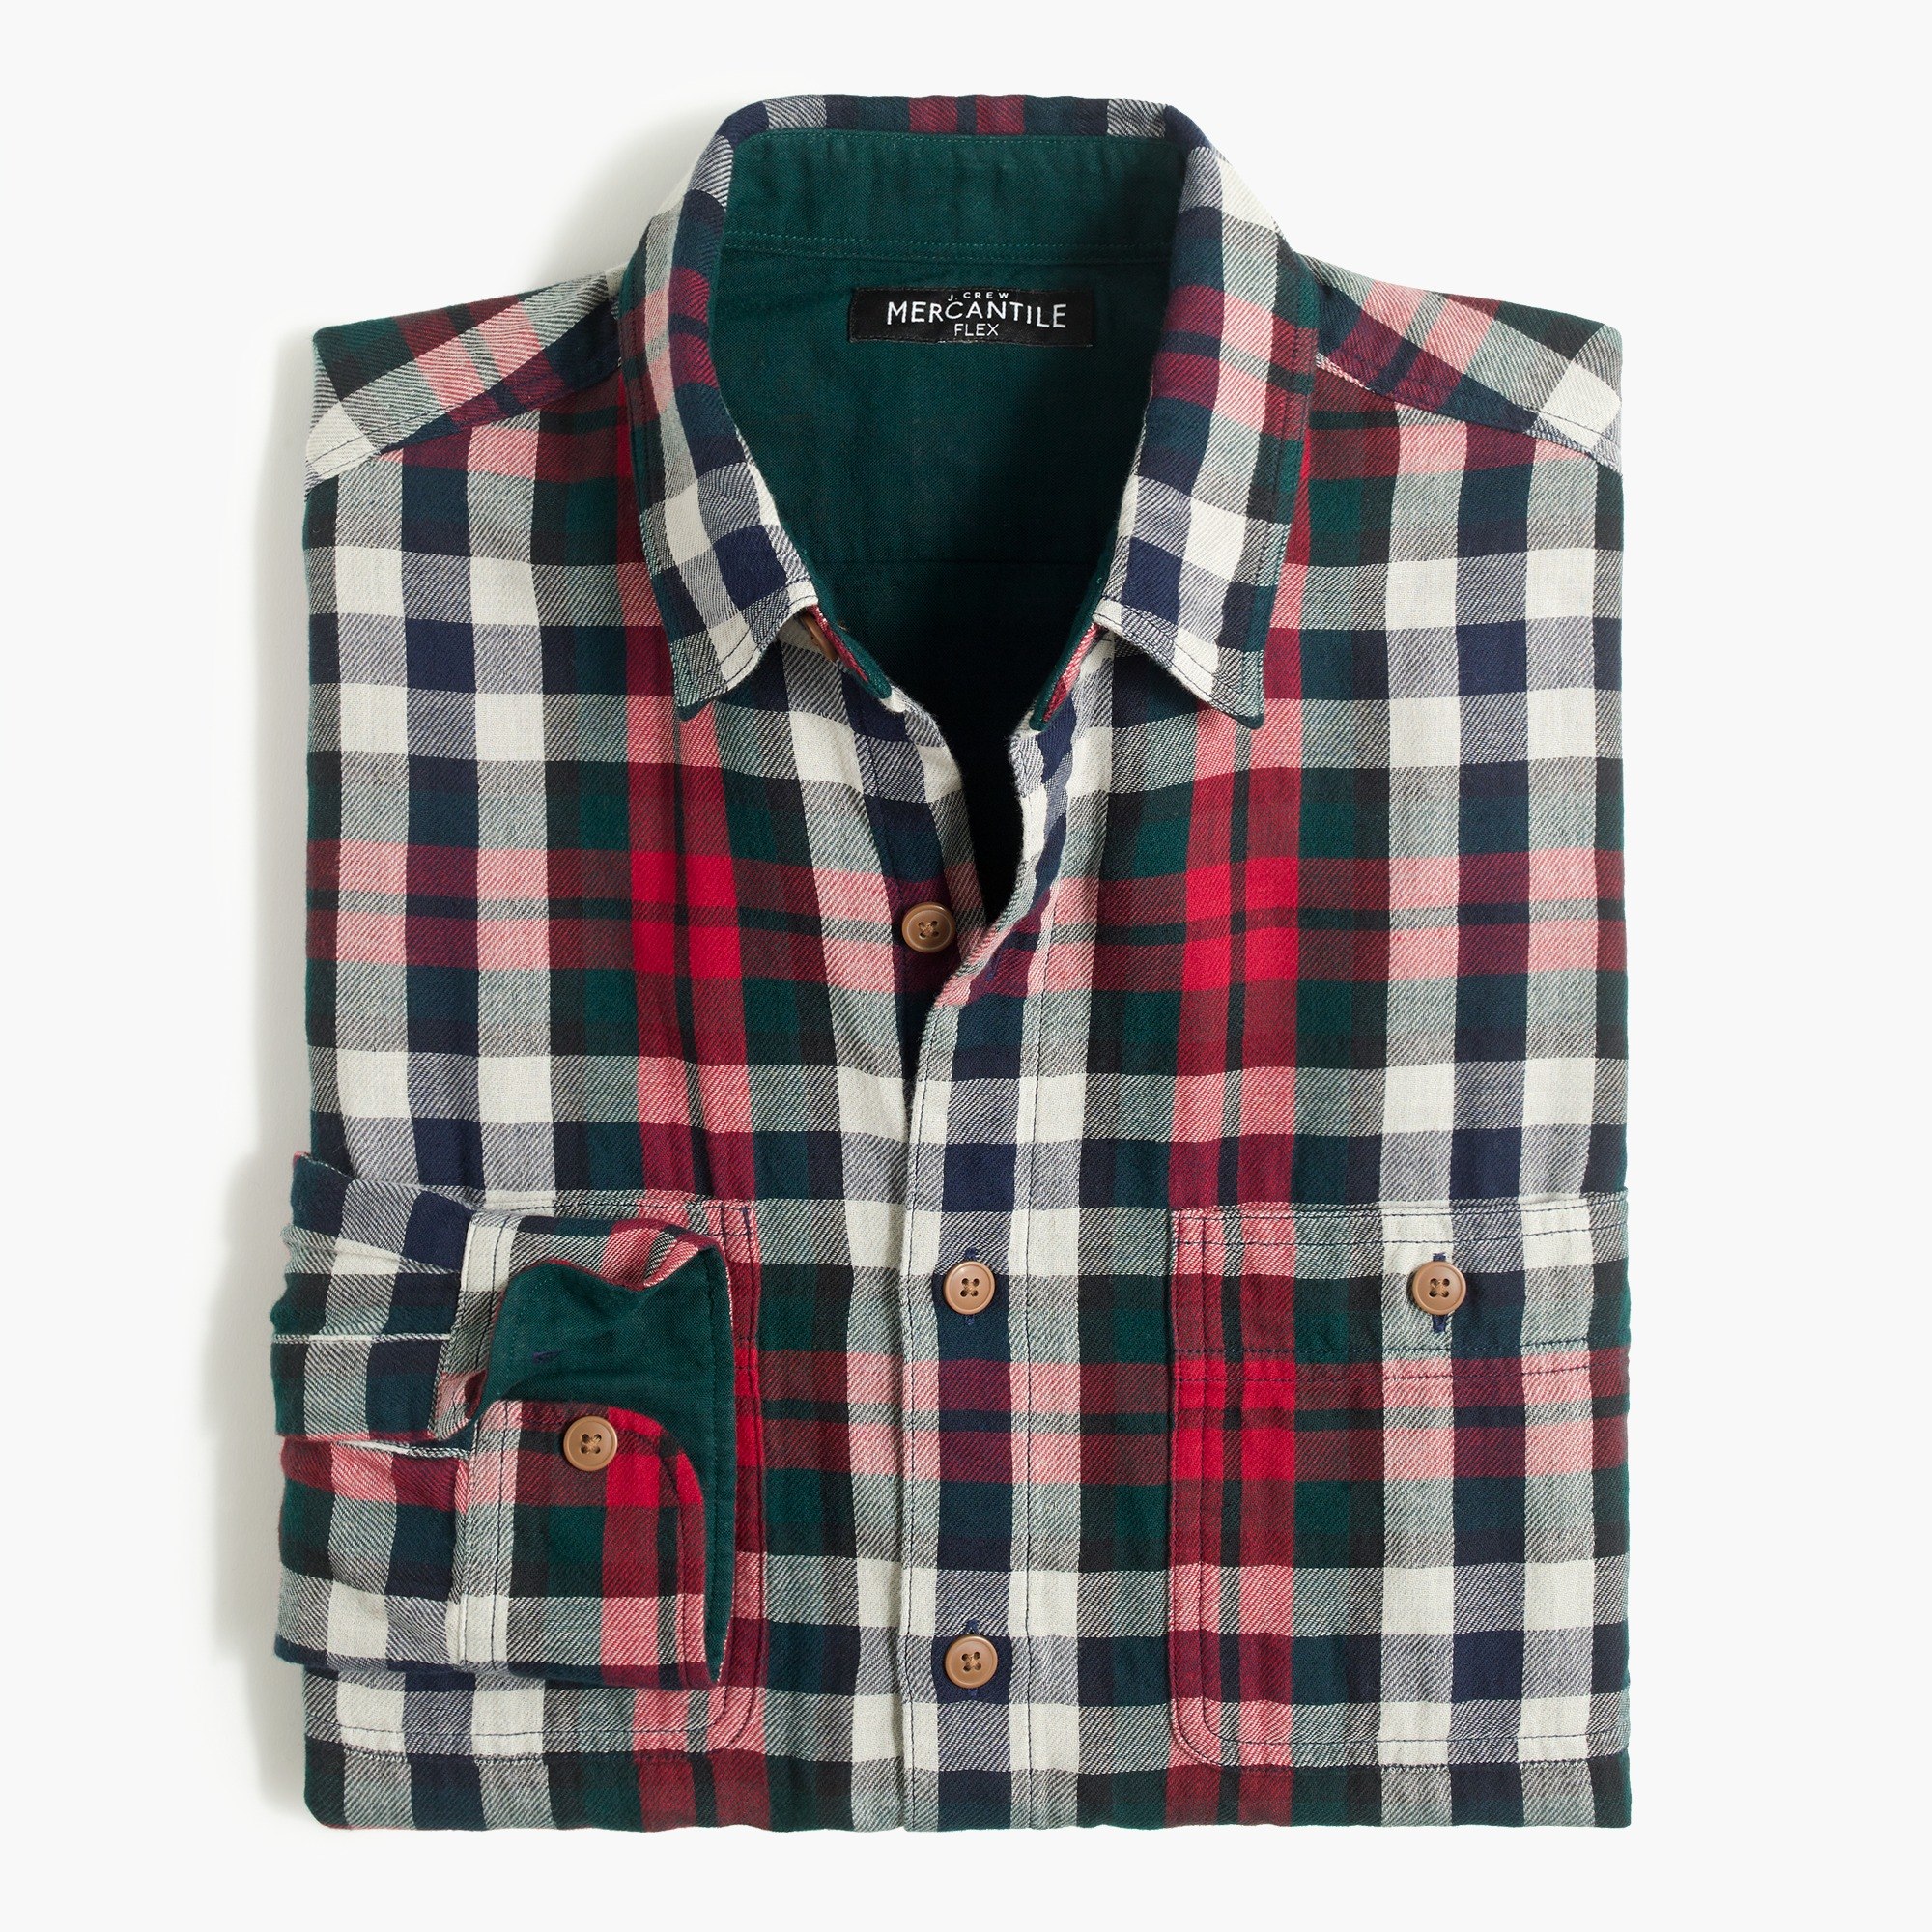 Slim double-layer shirt in plaid : FactoryMen Double Layer Shirt